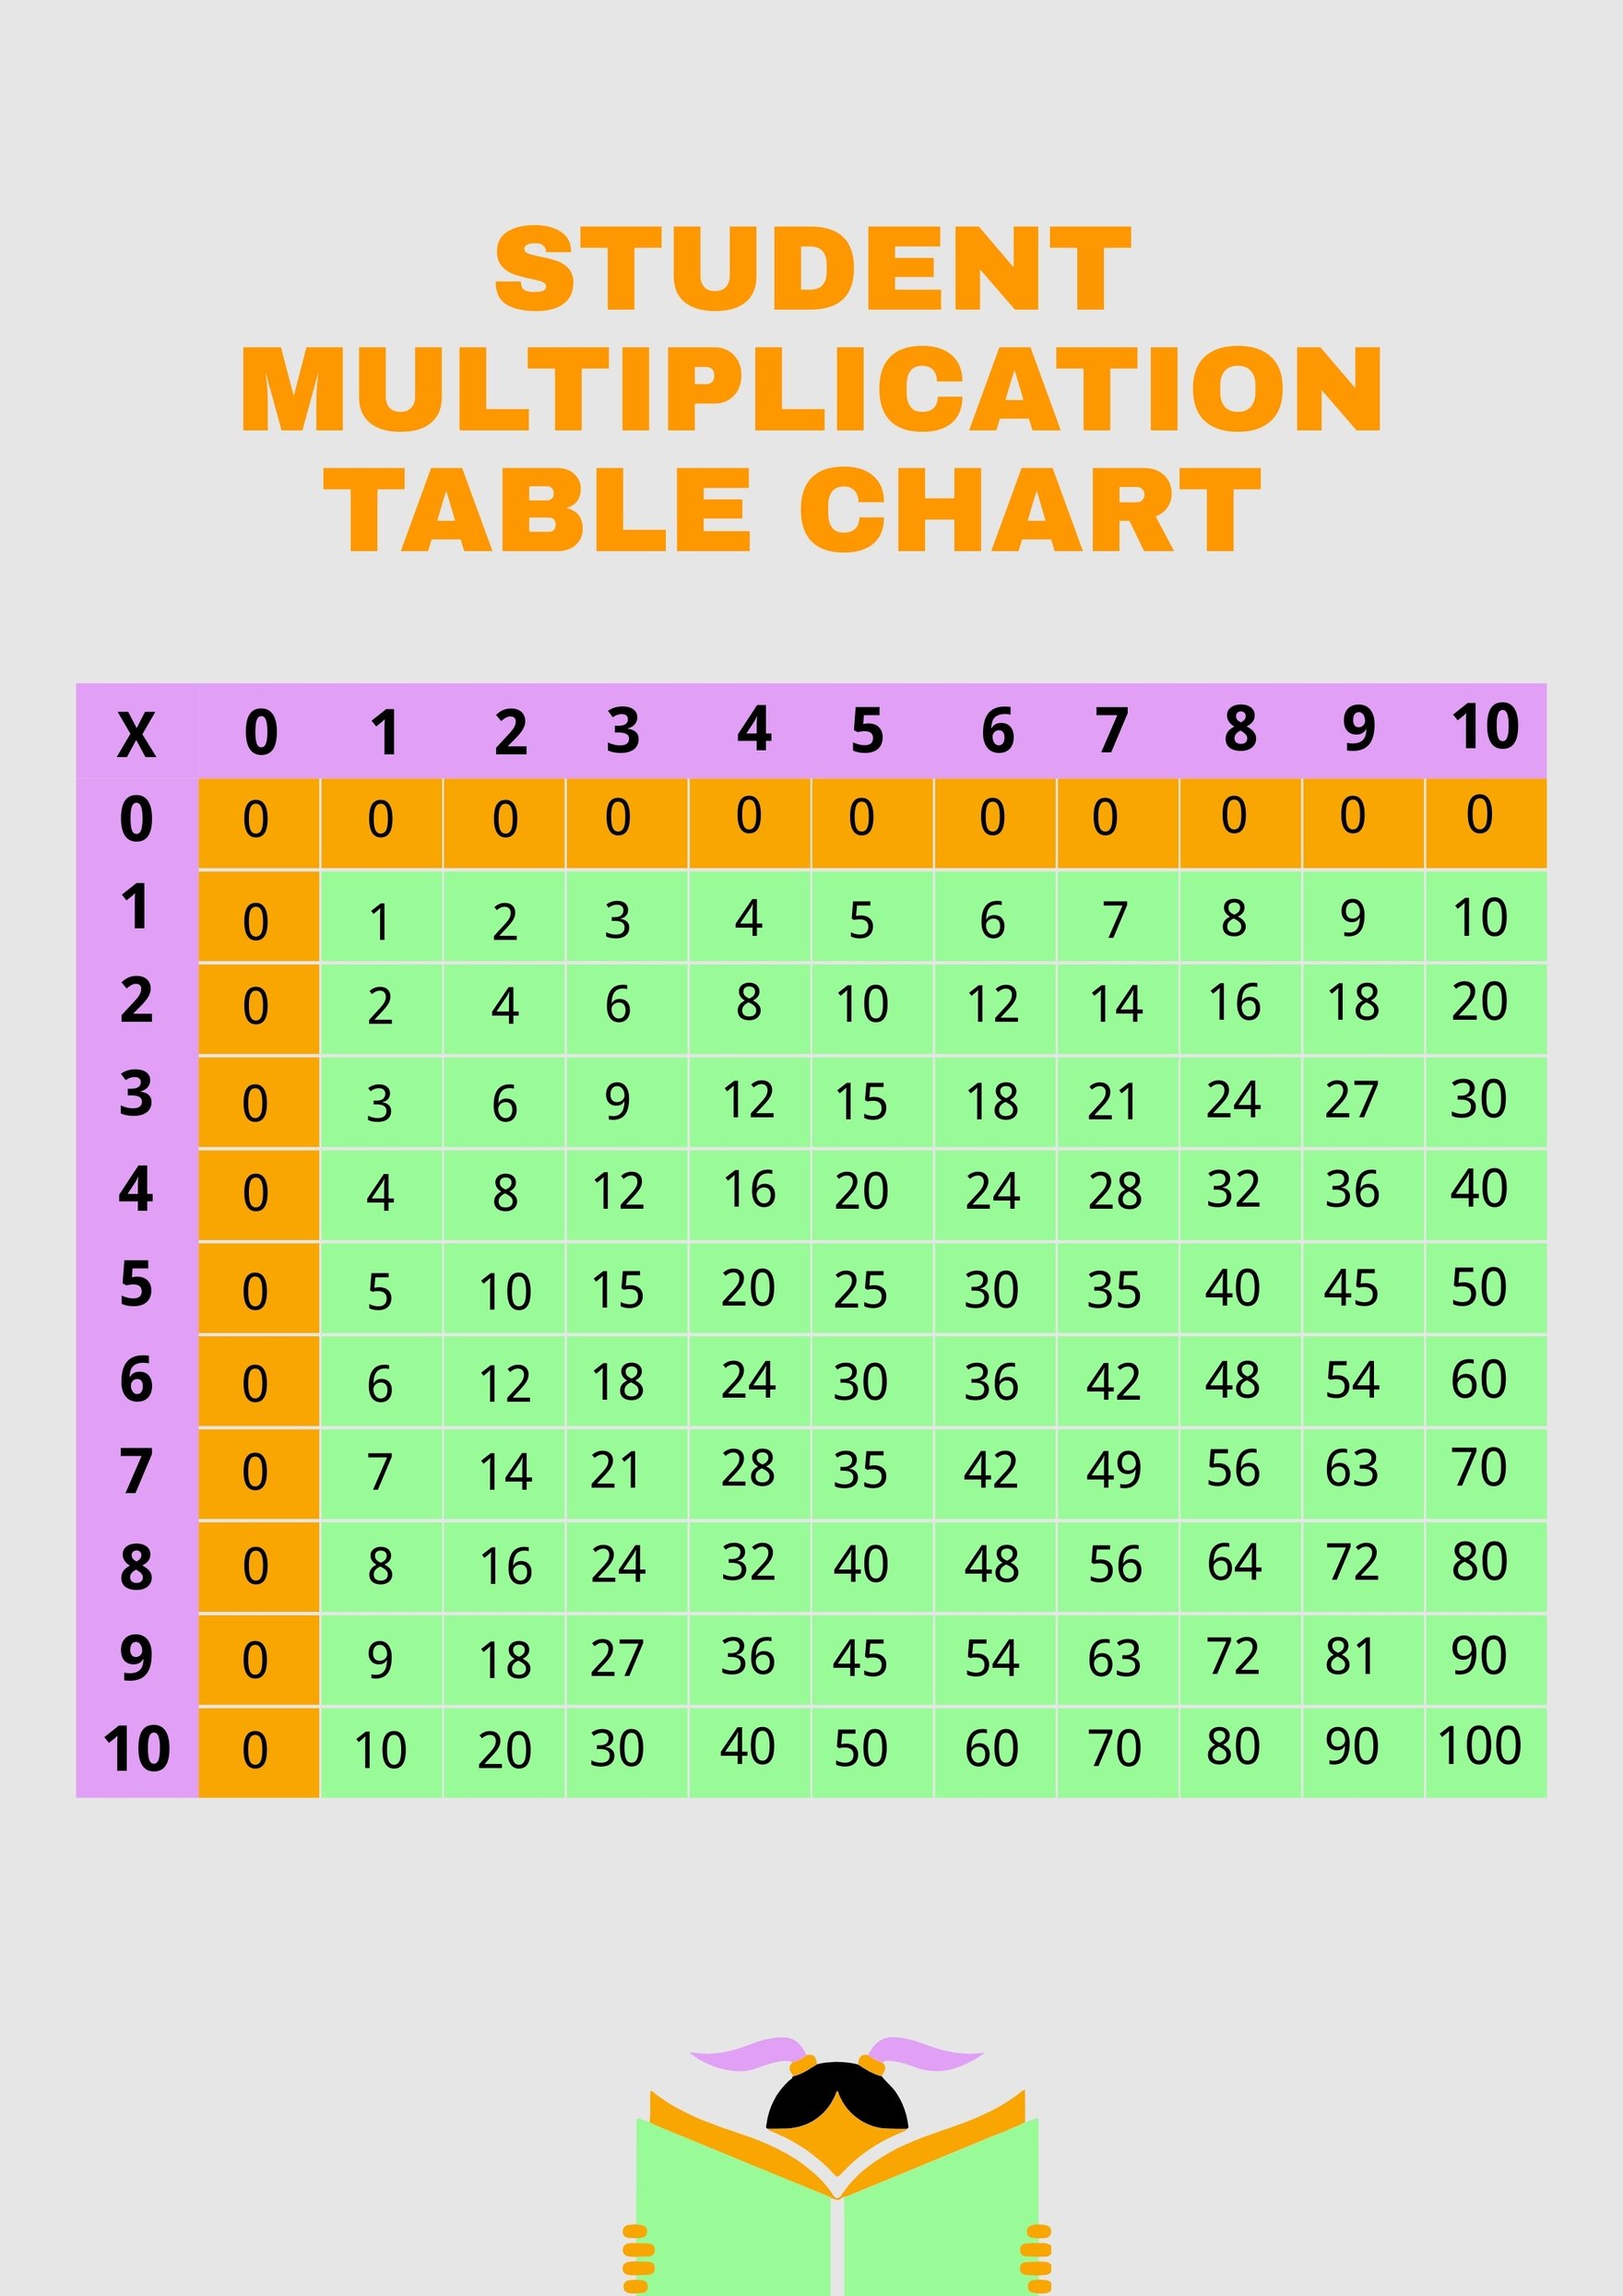 Multiplication Table Chart Template for Student